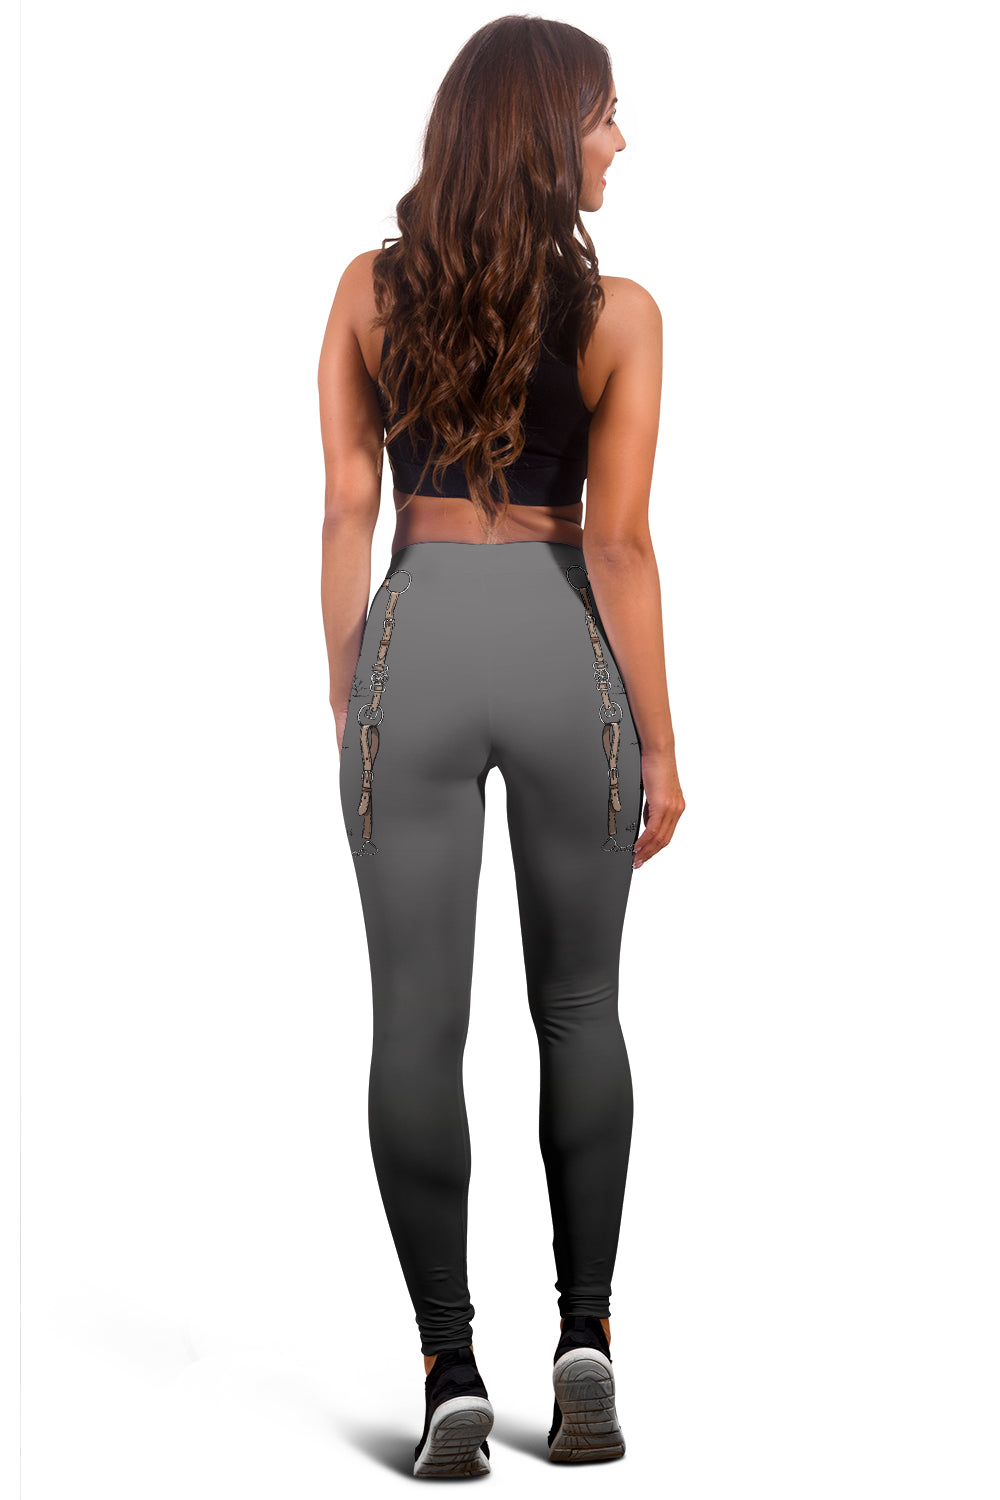 thebridleboutique  ***NOVEMBER 2023 STOCK INCLUDES BELT LOOPS***Our Mare  Ware Equestrian Riding Leggings are made from a technical compression,  lycra material that is extremely comfortable for long hours in the saddle.  Due